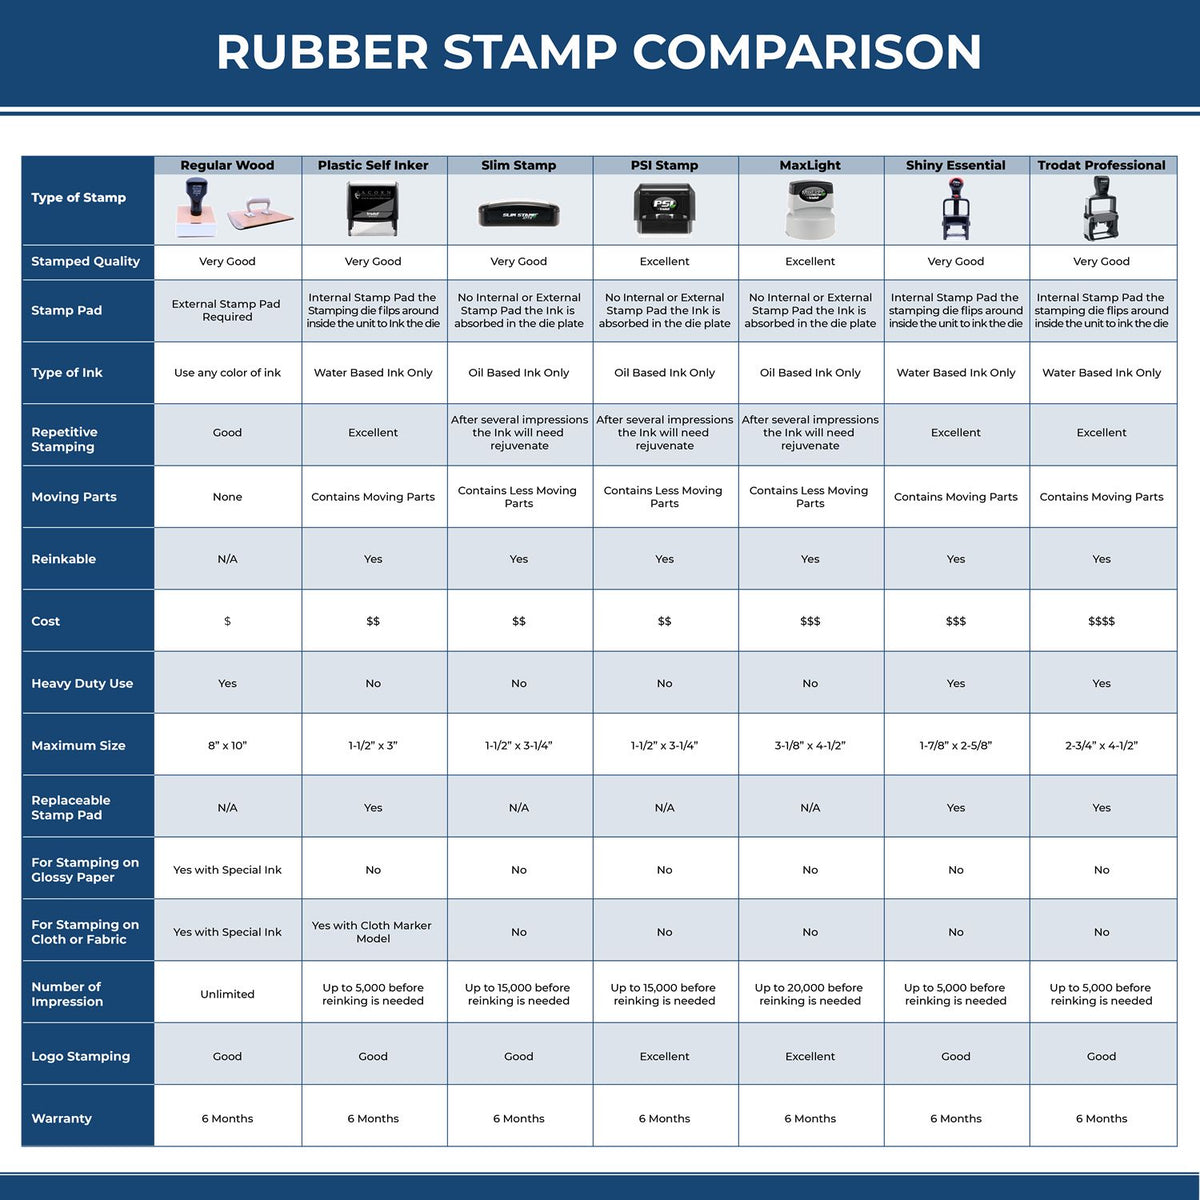 Large Paid with Date Line Rubber Stamp 4923R Rubber Stamp Comparison